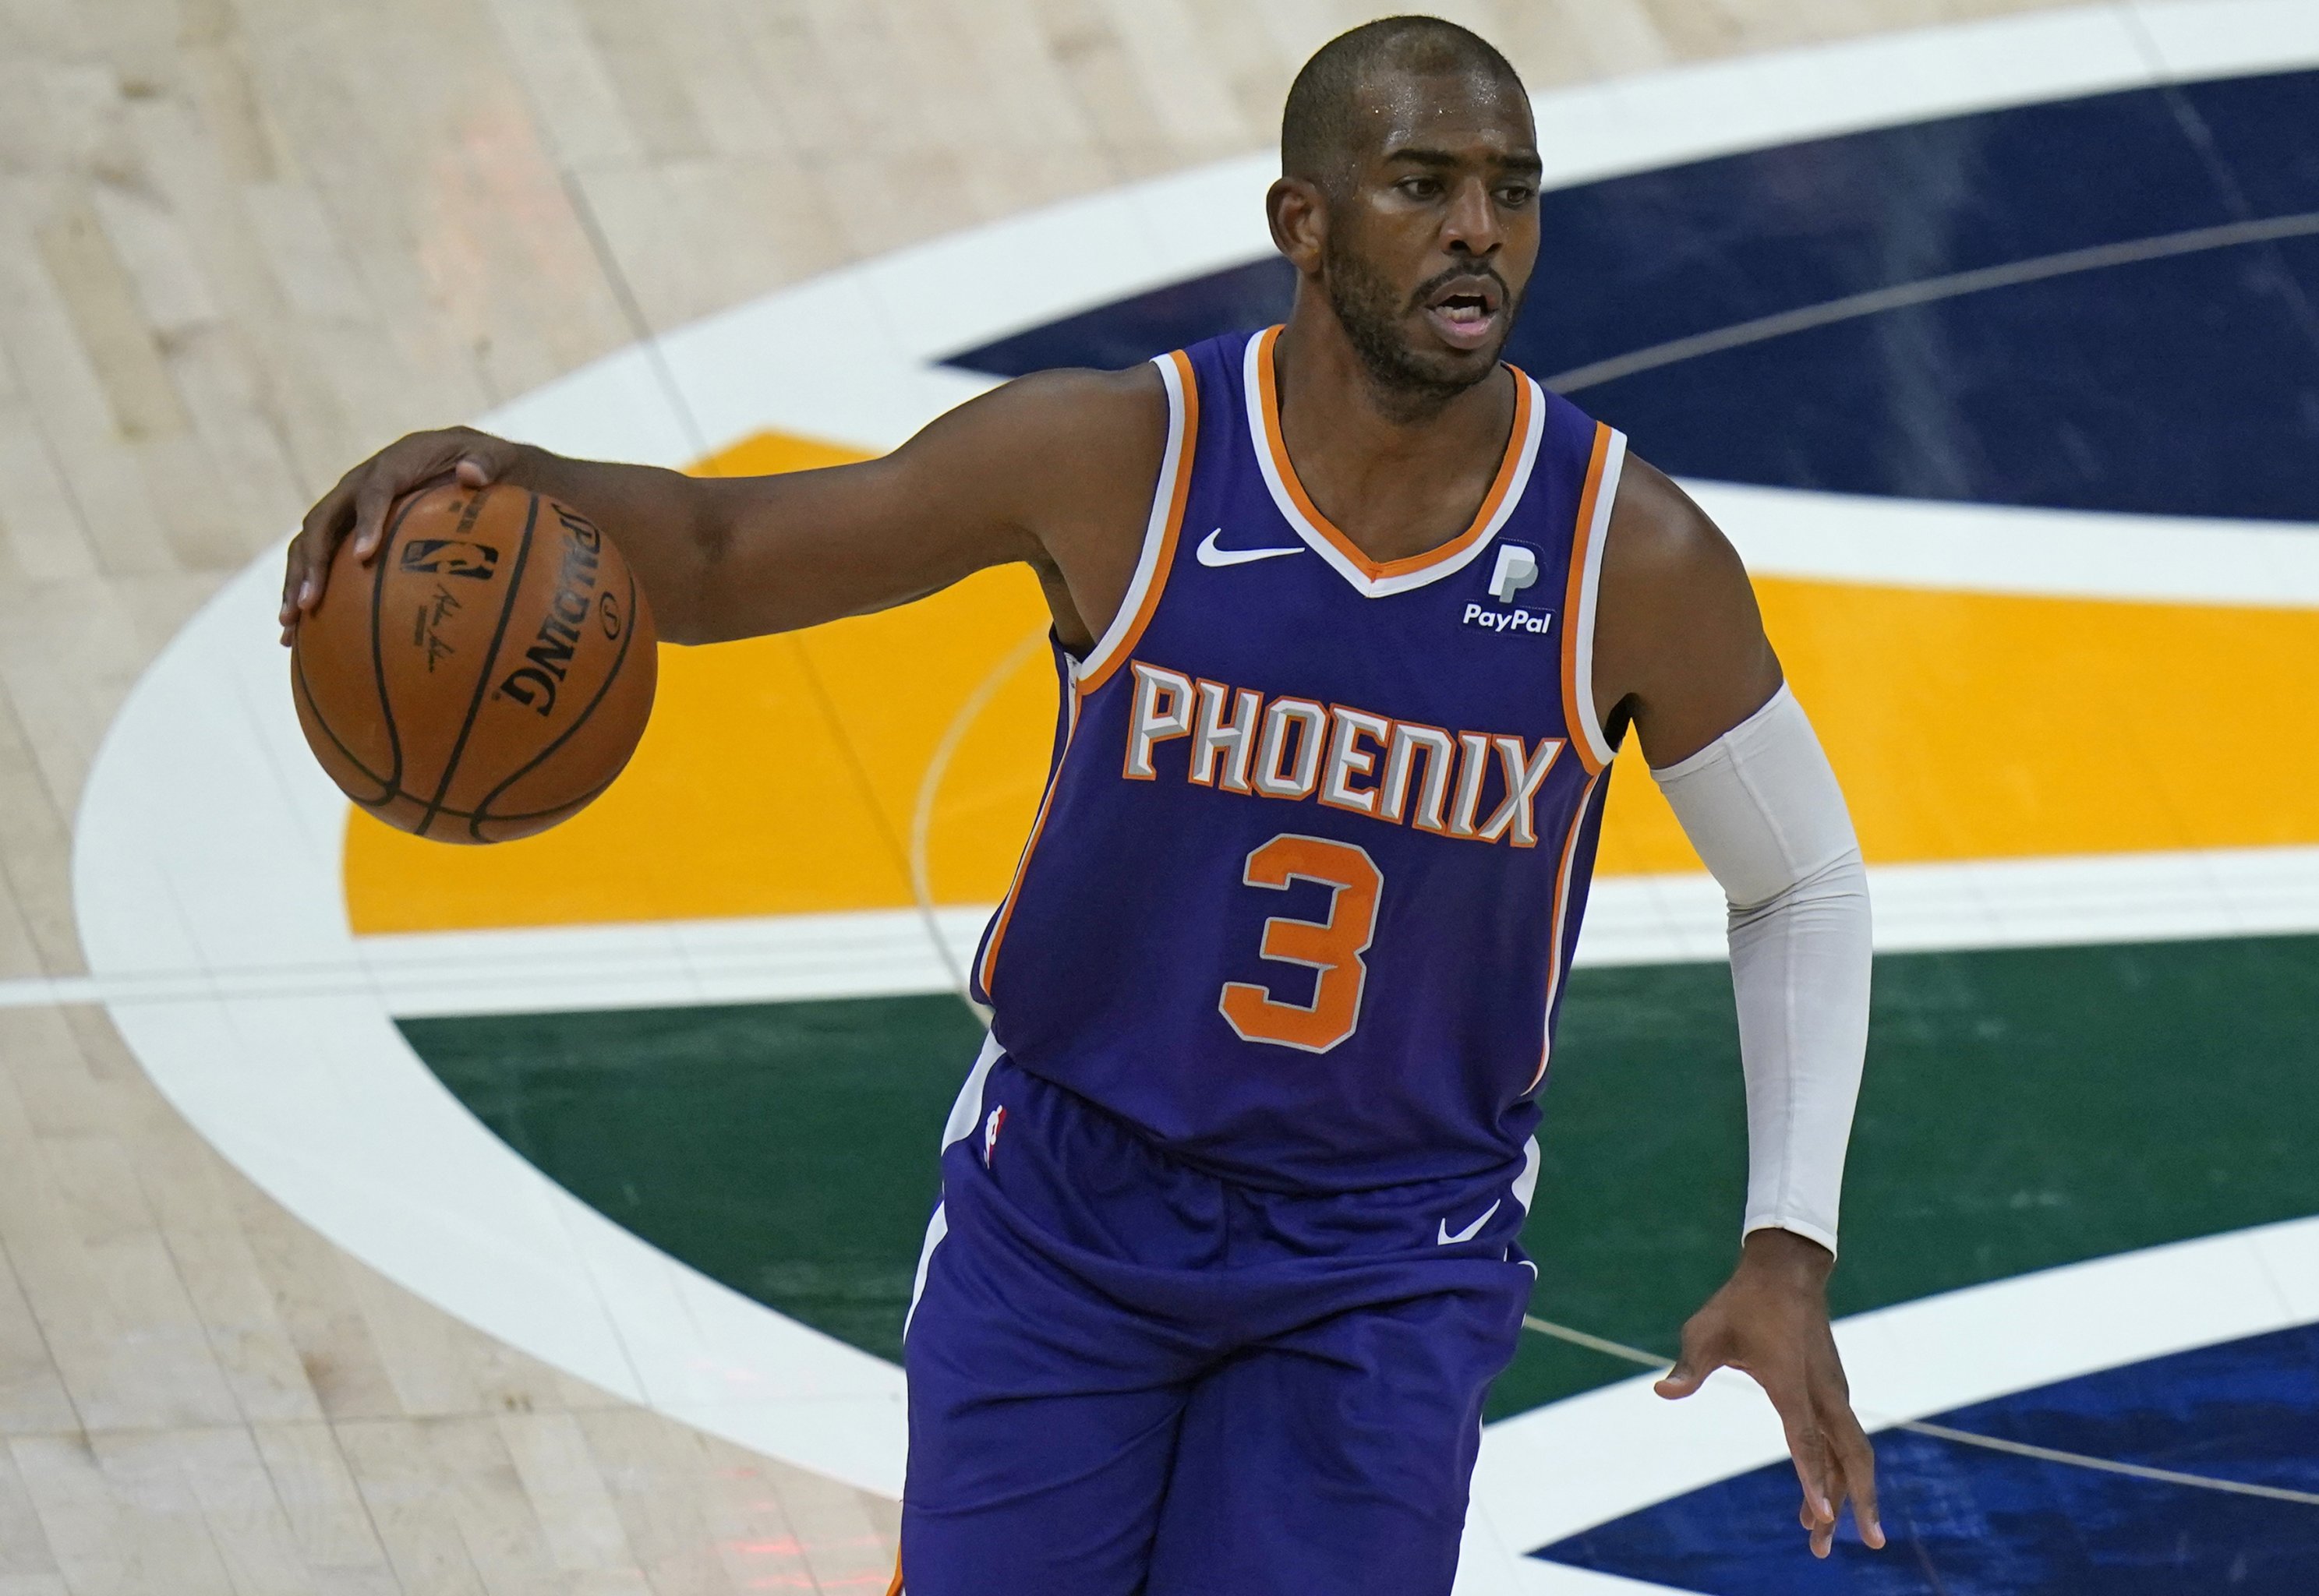 Alec Burks still working to understand role, bubble helps chemistry